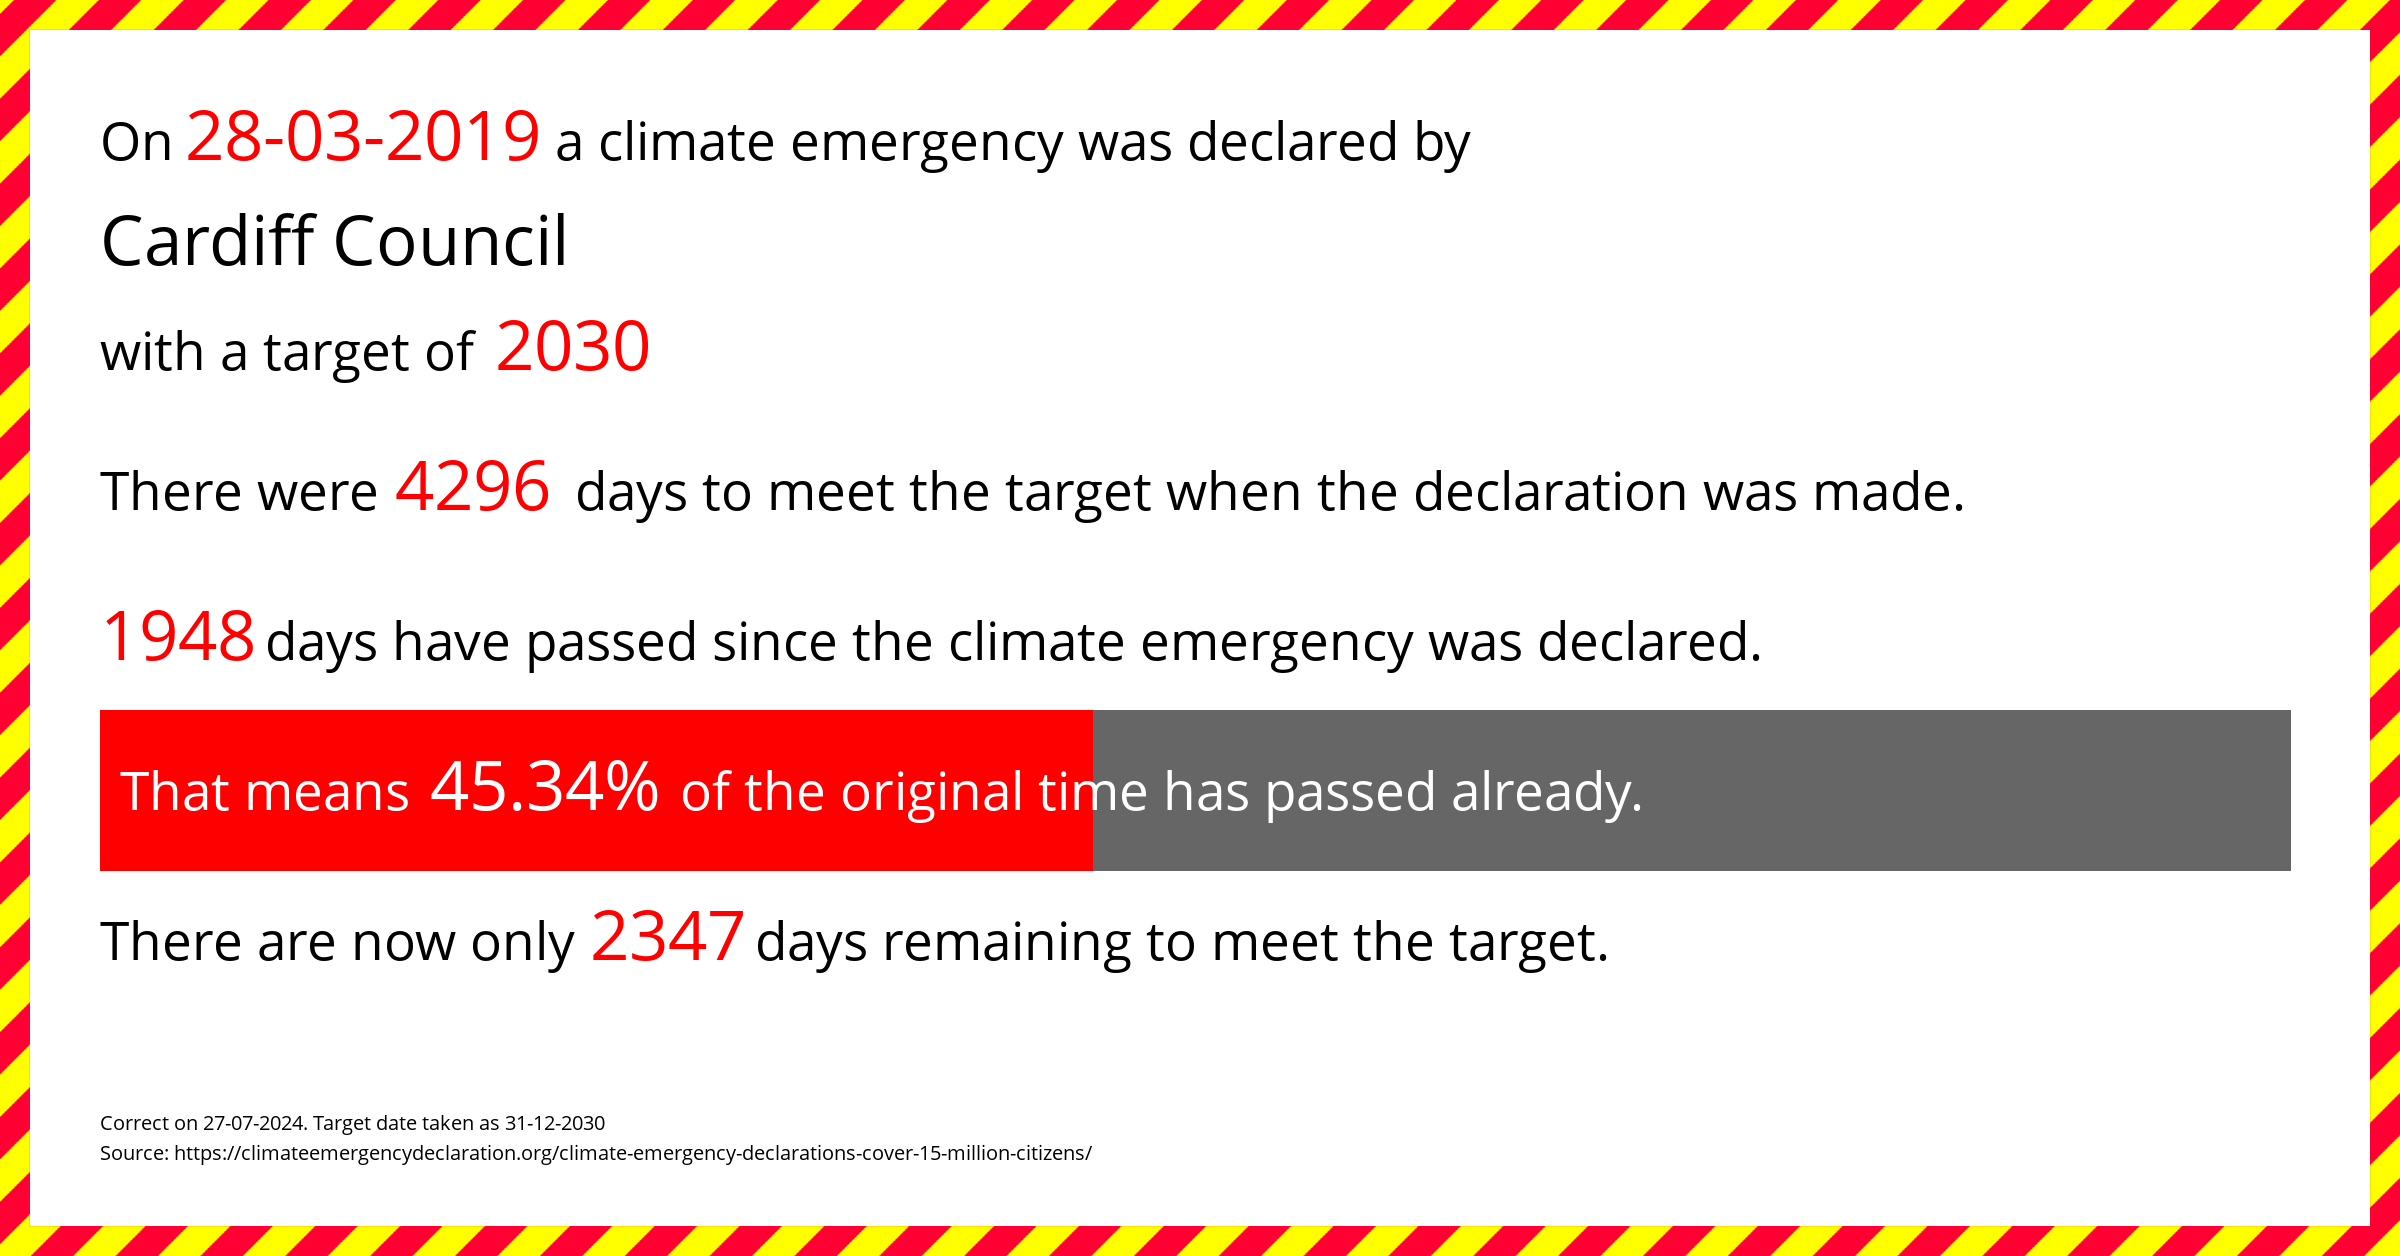 Cardiff Council declared a Climate emergency on Thursday 28th March 2019, with a target of 2030.